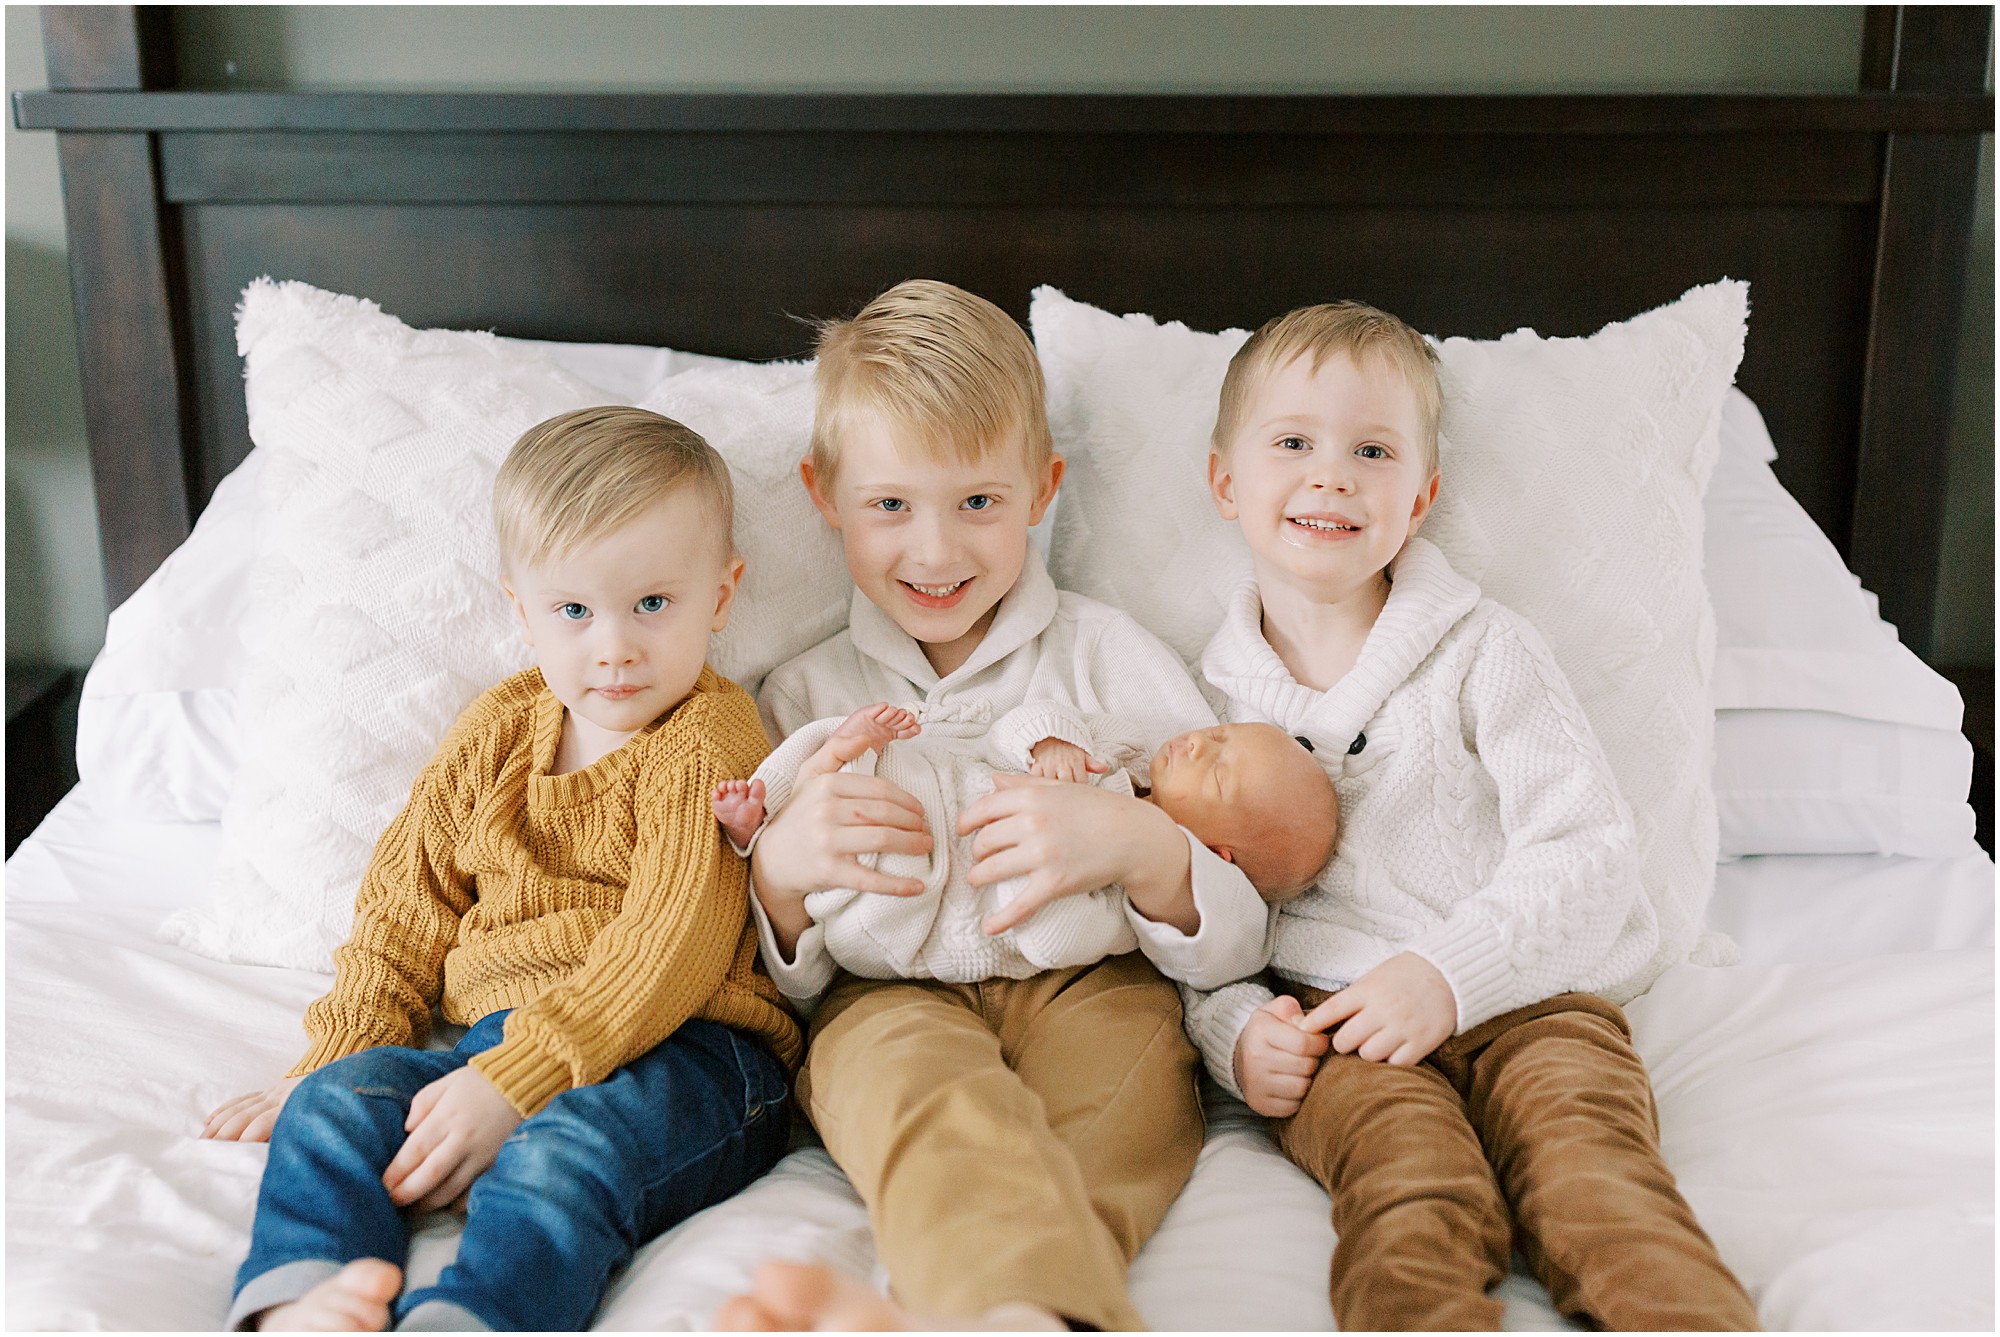 Boys with their newborn baby brother on a bed